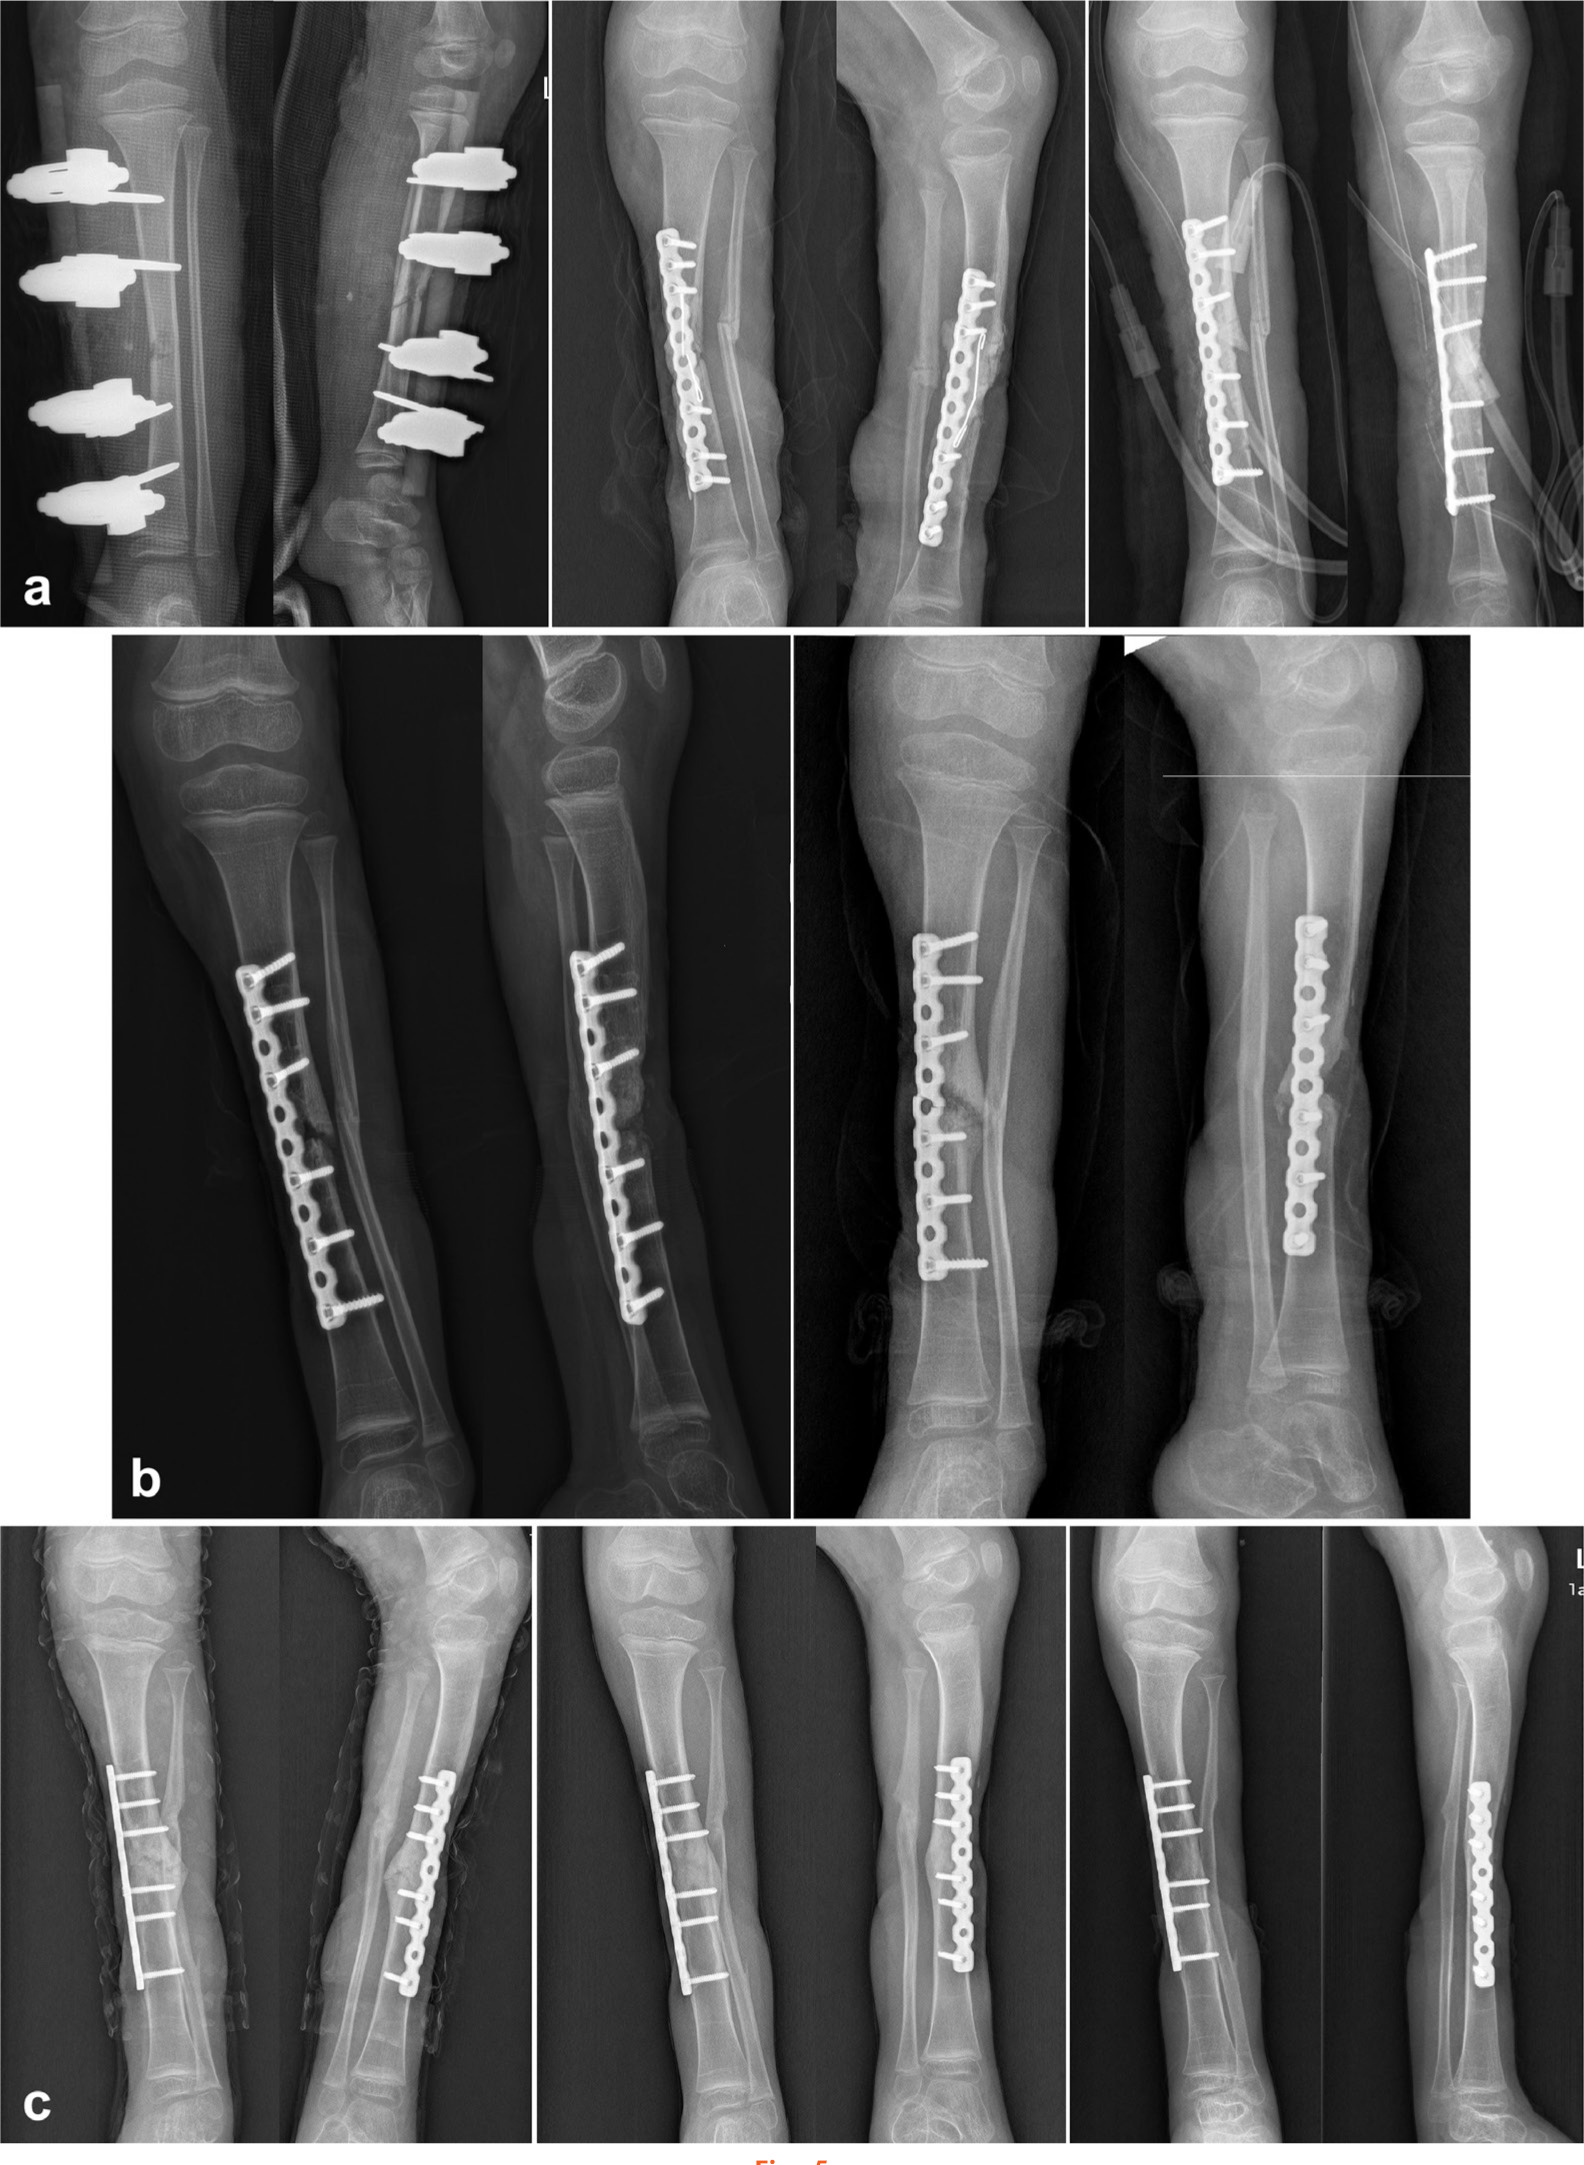 Fig. 5 
          Radiographs demonstrating the healing process of a seven-year-old female patient with bone defect of 20 ml in Group BMAA. a) Anteroposterior (AP) and lateral radiographs before first operation, after first operation, and after second operation. b) AP and lateral radiographs from 2 and 7 months postoperatively of second stage, demonstrating bone resorption in the grafting site and implant break. c) Additional procedures of bone grafting with bone marrow aspirate were done. AP and lateral radiographs from 3, 5, and 18 months postoperatively of the third revision surgery, demonstrating bony consolidation in the third month. BMAA, bone marrow aspirate mixed allograft.
        